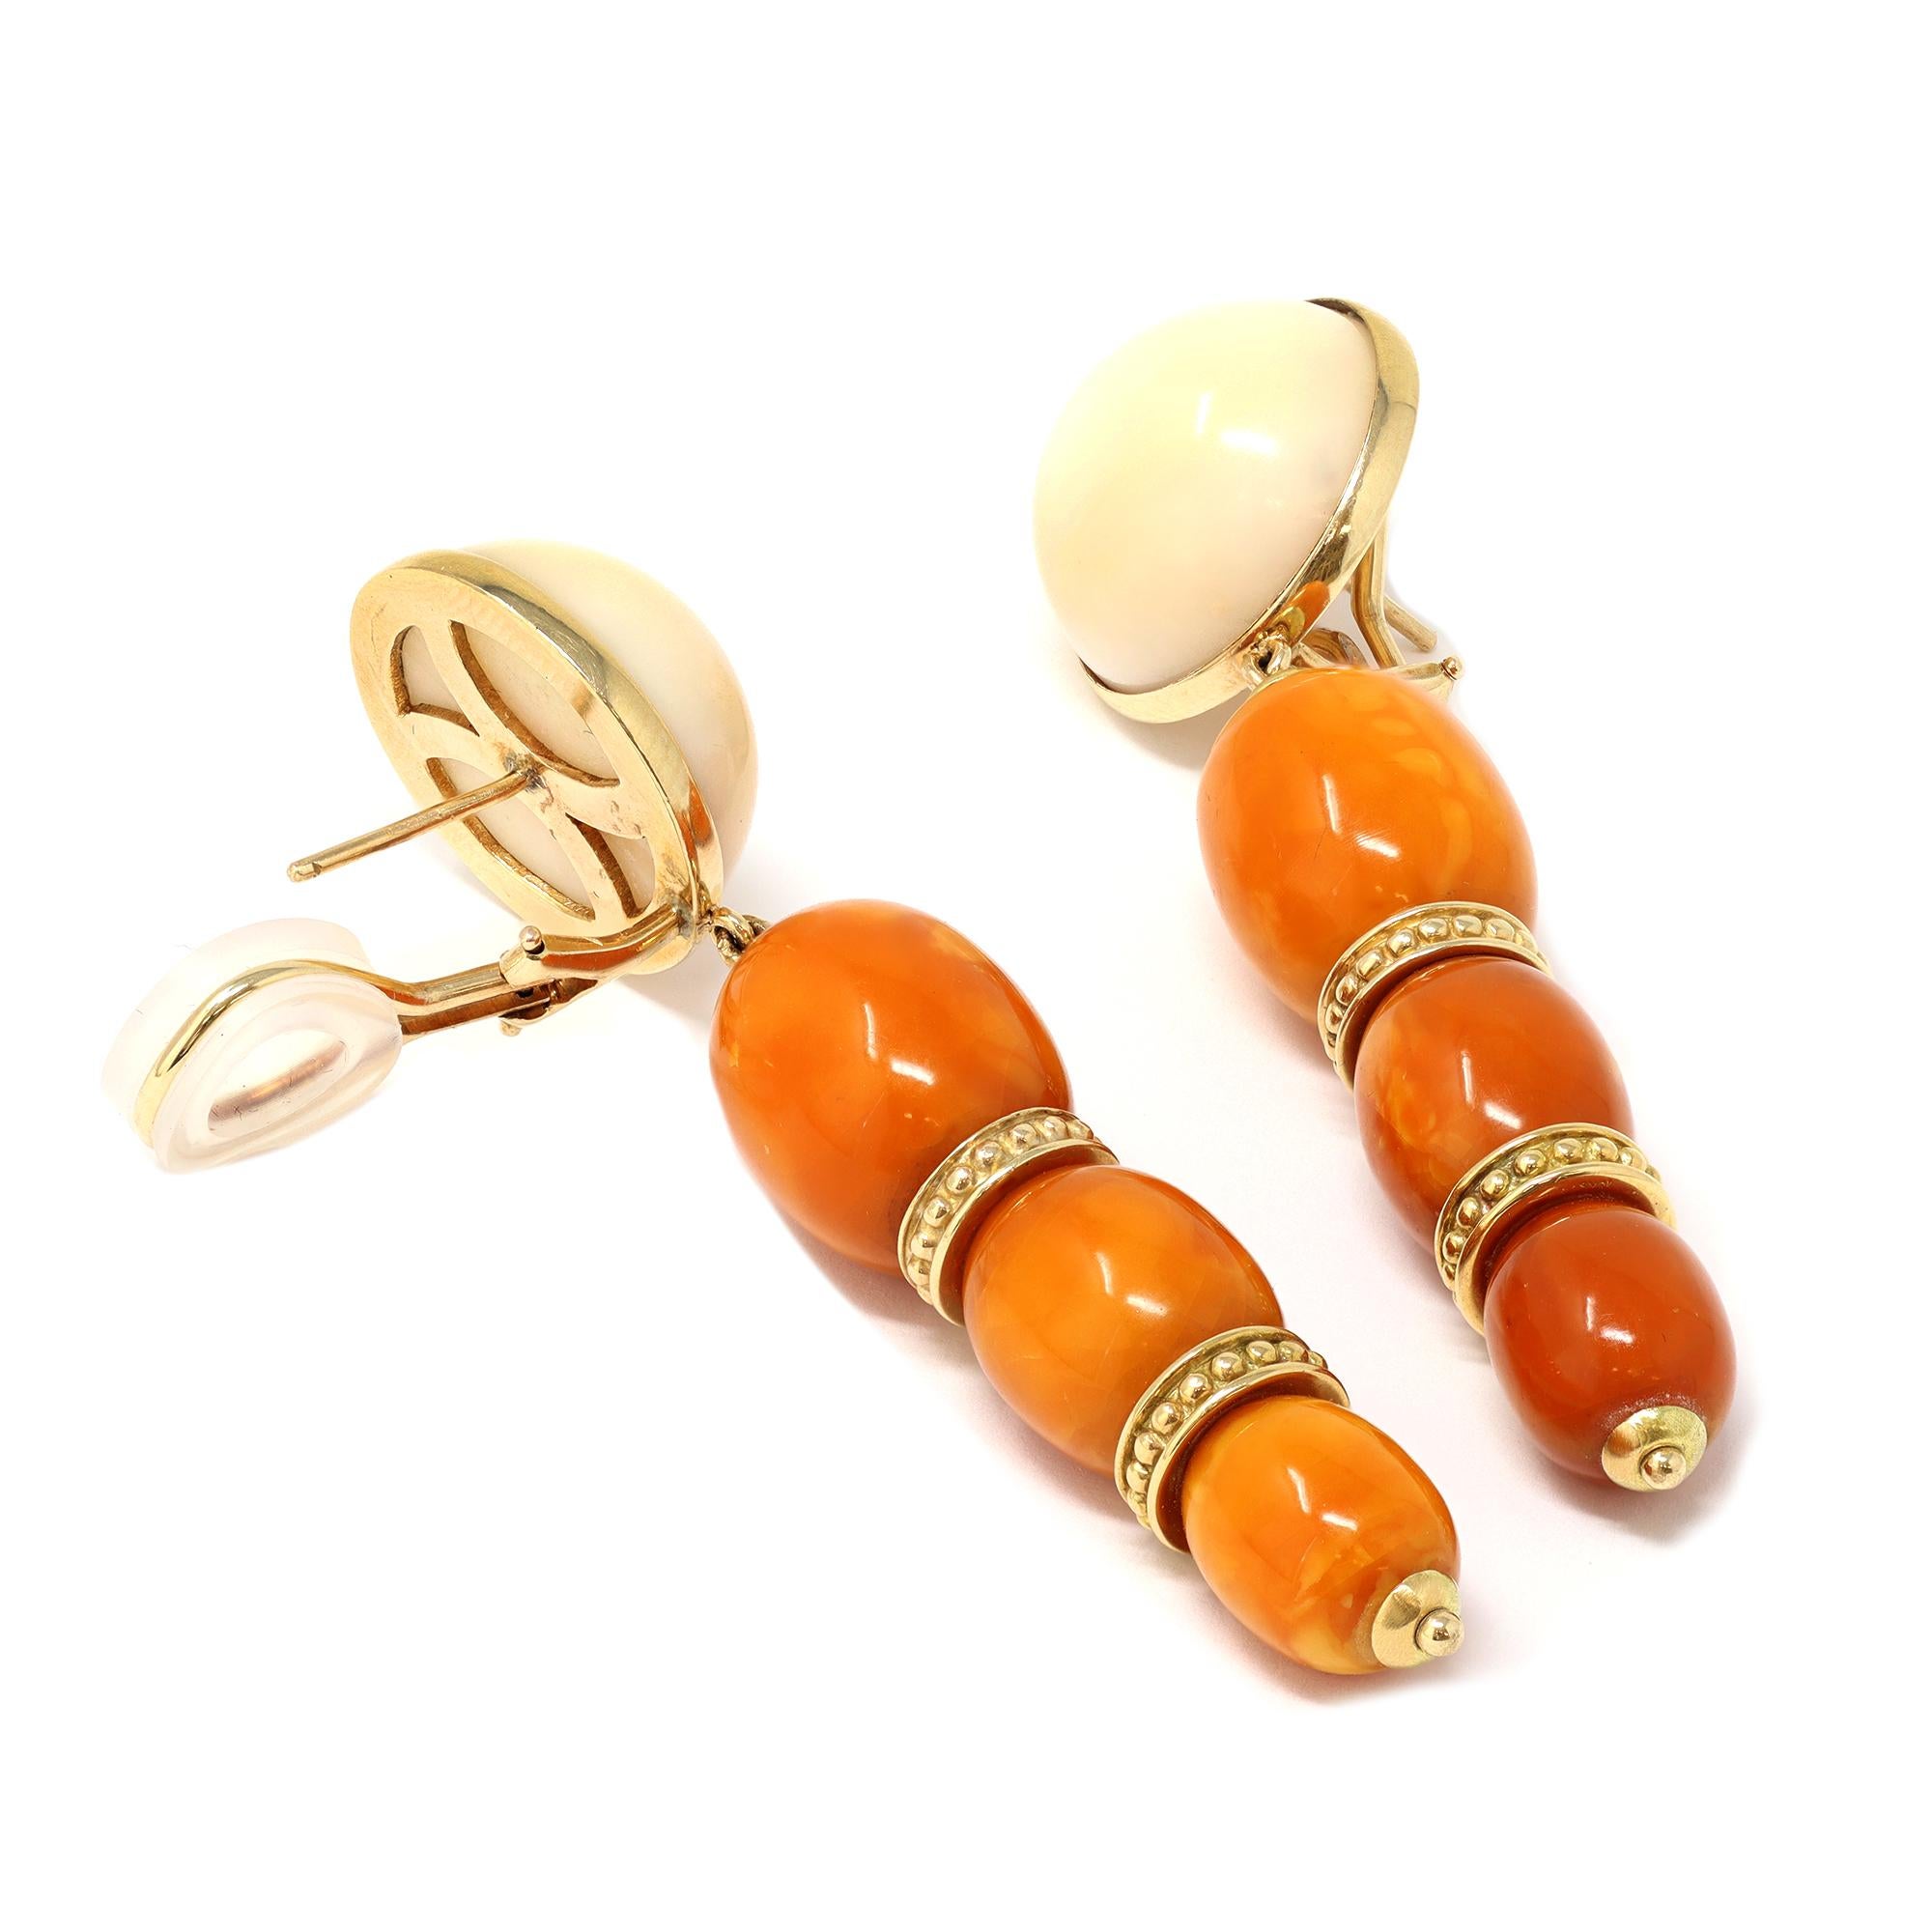 A unique pair of dangling earrings circa 1960-70 featuring natural untreated “butterscotch” Amber bead pendants and White coral cabochon studs. The earrings are set in 14 karat yellow gold. 
These vintage earrings are in pristine condition.  The